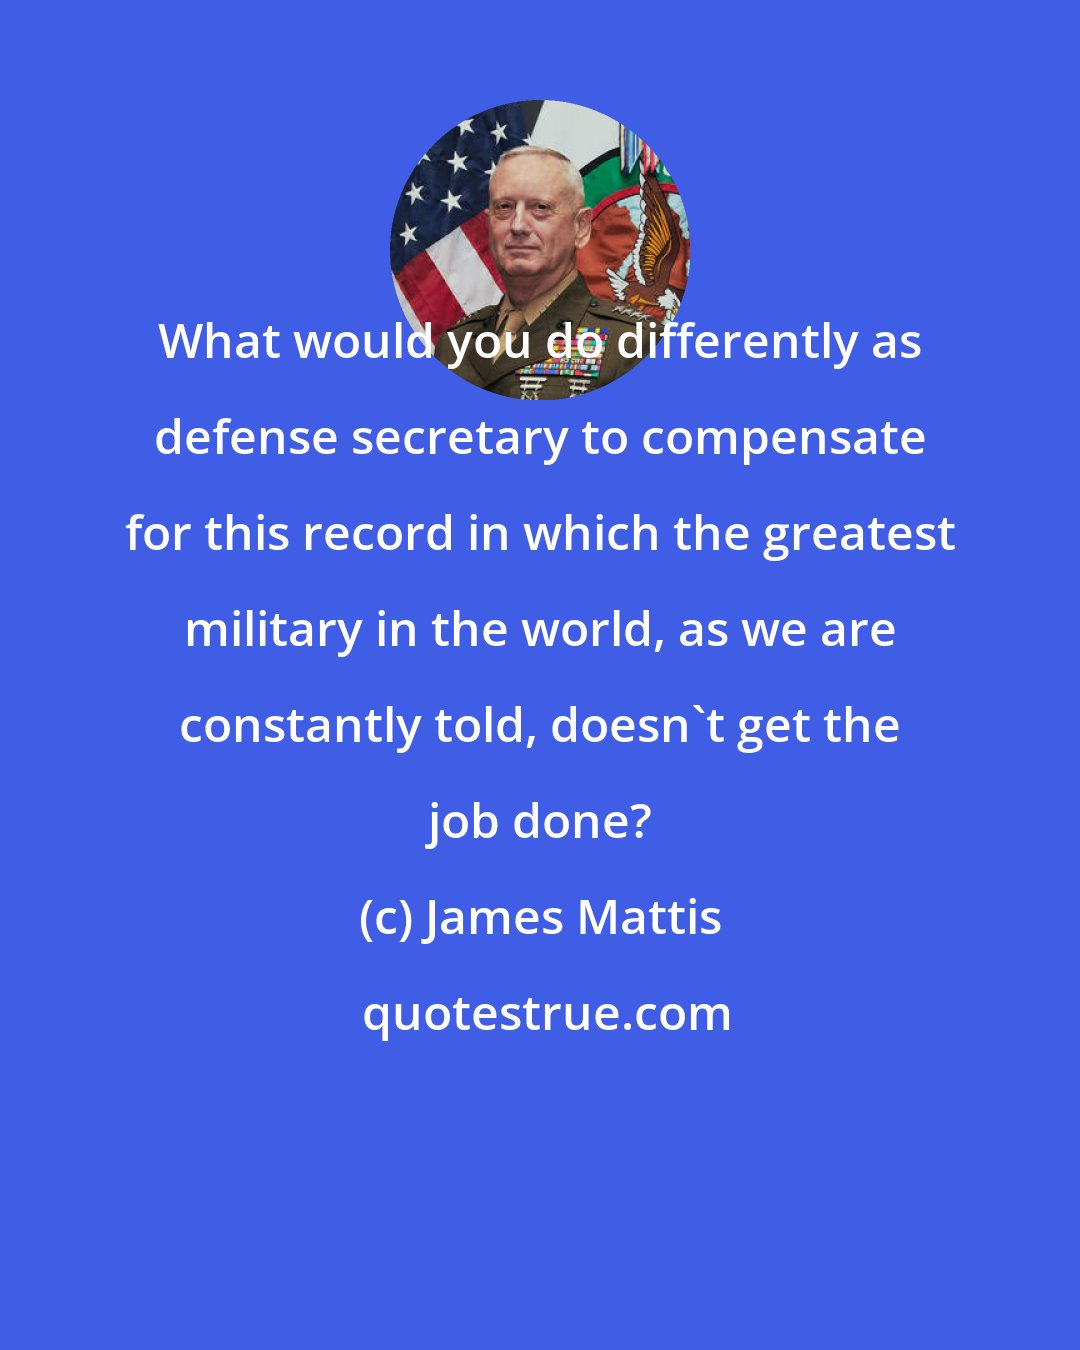 James Mattis: What would you do differently as defense secretary to compensate for this record in which the greatest military in the world, as we are constantly told, doesn't get the job done?